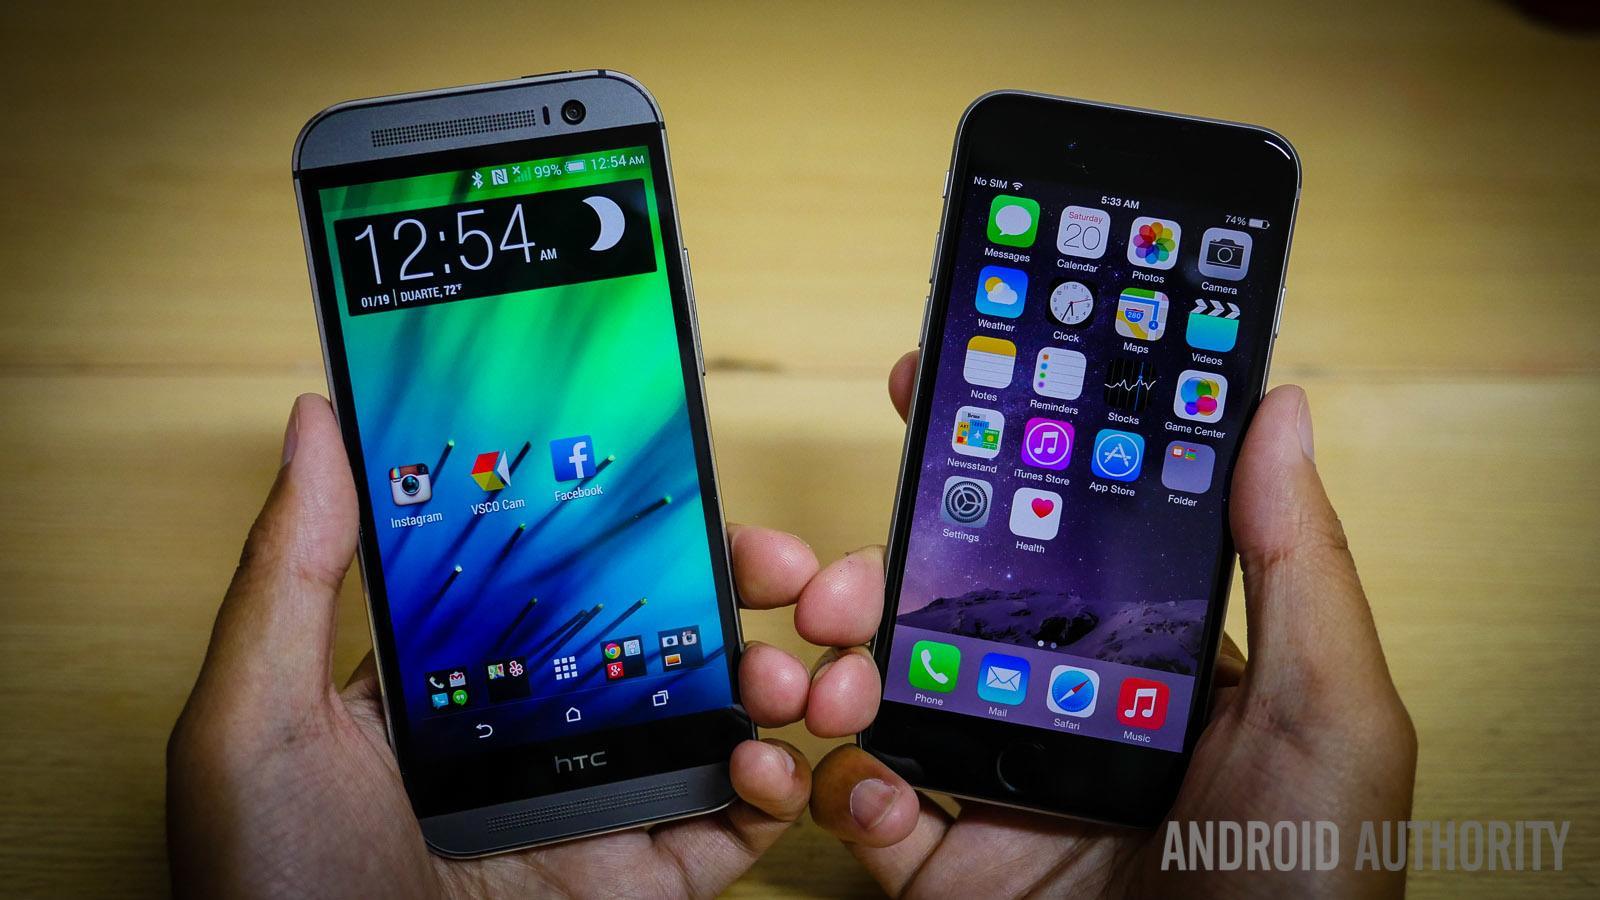 iphone 6 plus vs htc one m8 quick look aa (10 of 14)